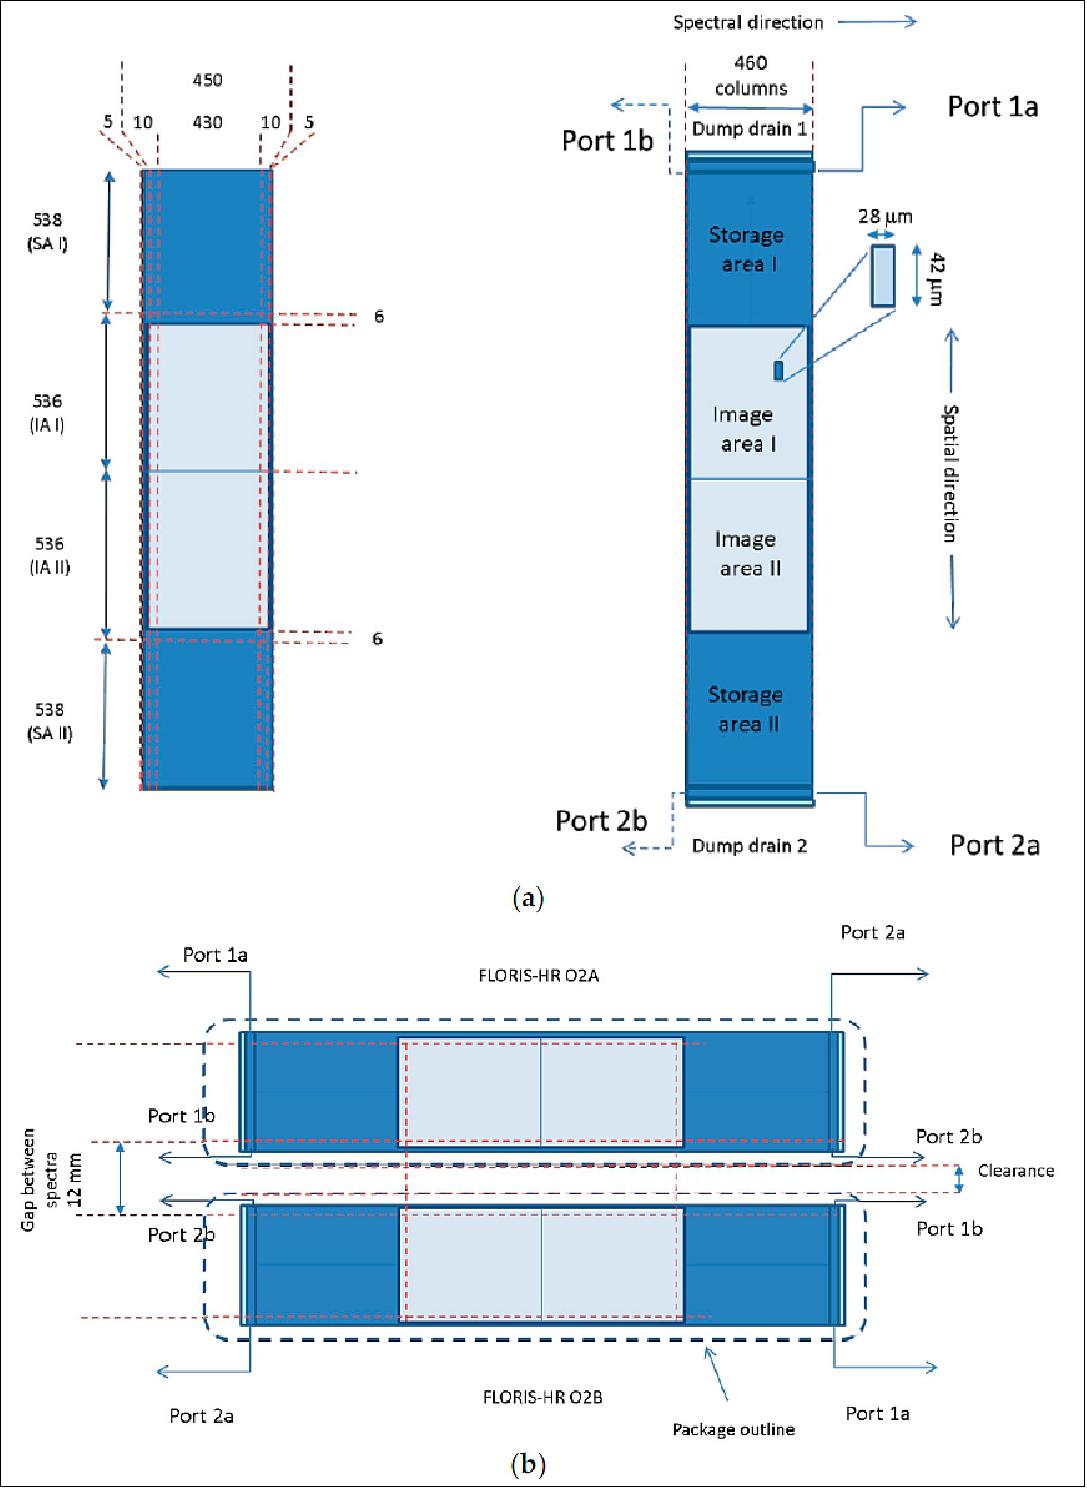 Figure 20: Detector configuration: (a) 460 columns and 536 x 2 rows are used in the Image Areas IA I-II (incl. alignment pixels), 5 x 2 columns are used for blind pixels (dark estimation) while 6 x 2 rows for smearing corrections. Two different Storage Areas (SA I-II) are used for the reading-while integrating process though 2 output ports for each one. (b) geometry of the HR1 (O2B) and HR2 (O2A) detectors with 12 mm of separation between the image pixels (image credit: FLEX collaboration)